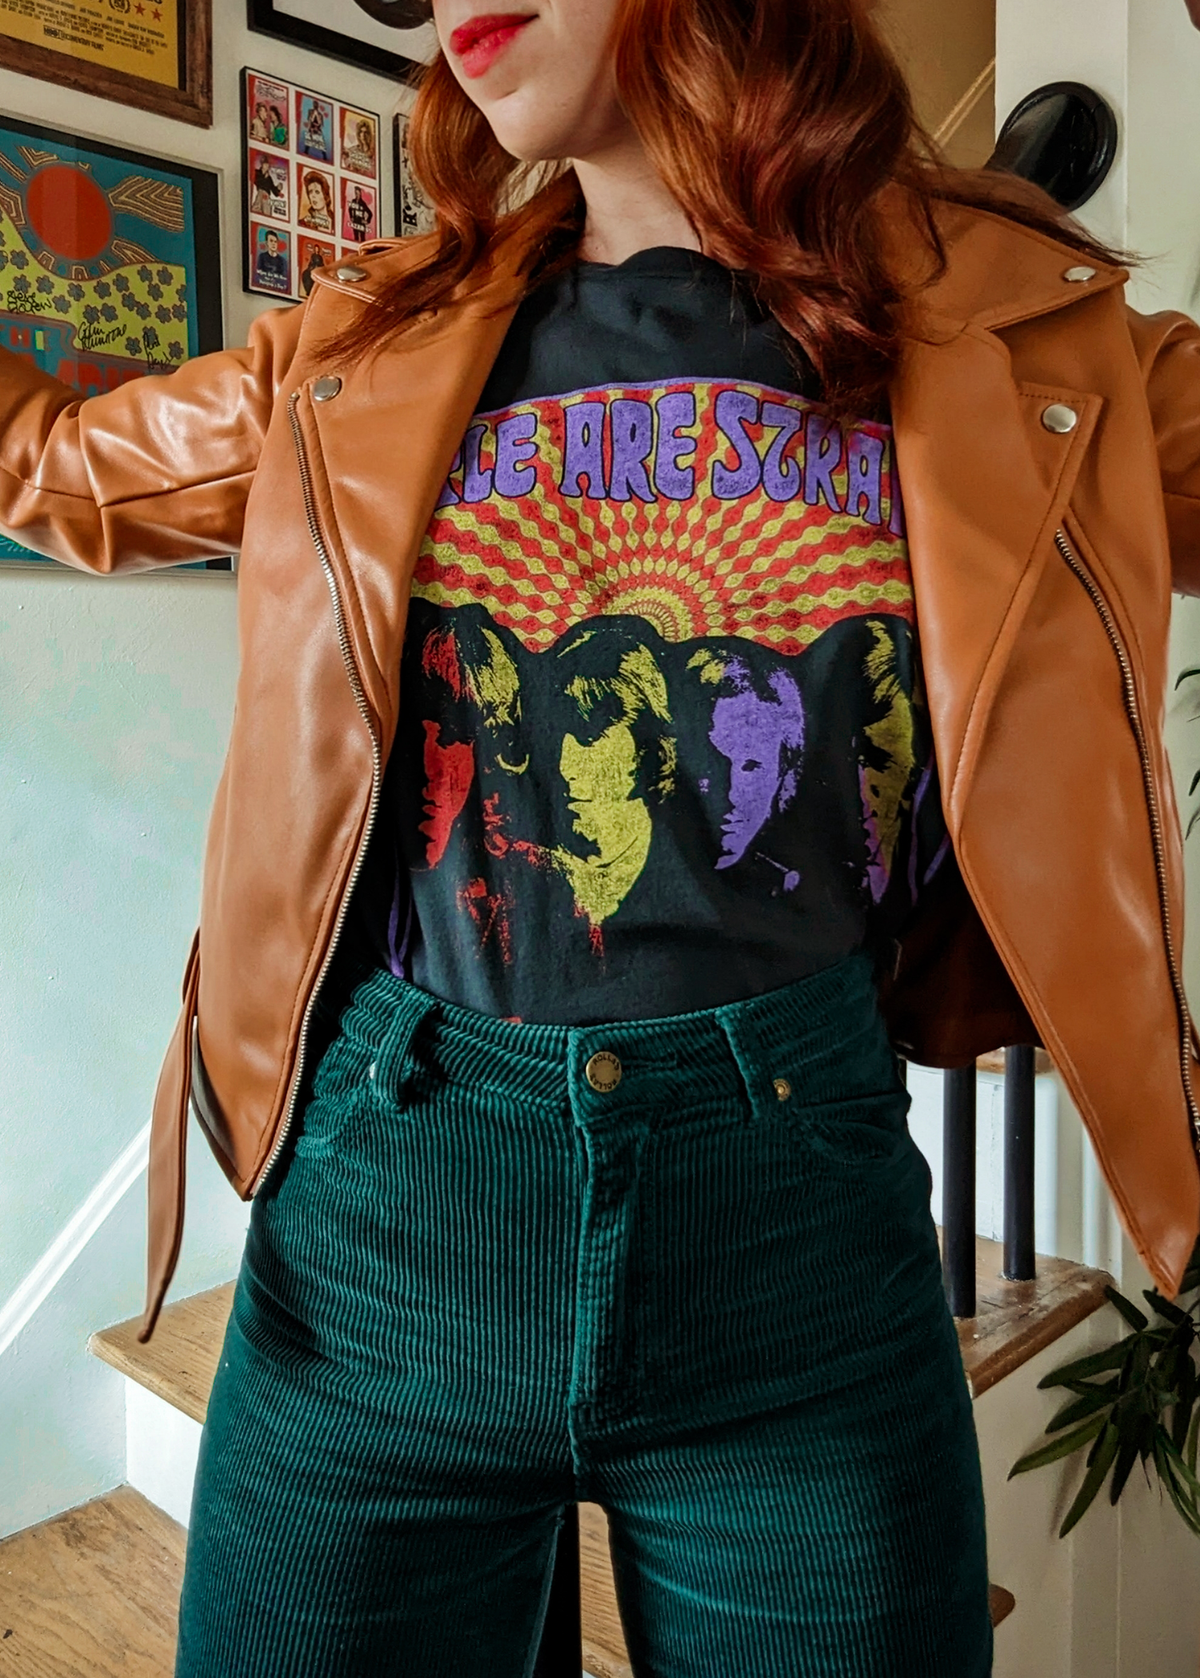 Daydreamer LA The Doors Jim Morrison People Are Strange Psychedelic Oversized Merch Tee. Made in California and officially licensed